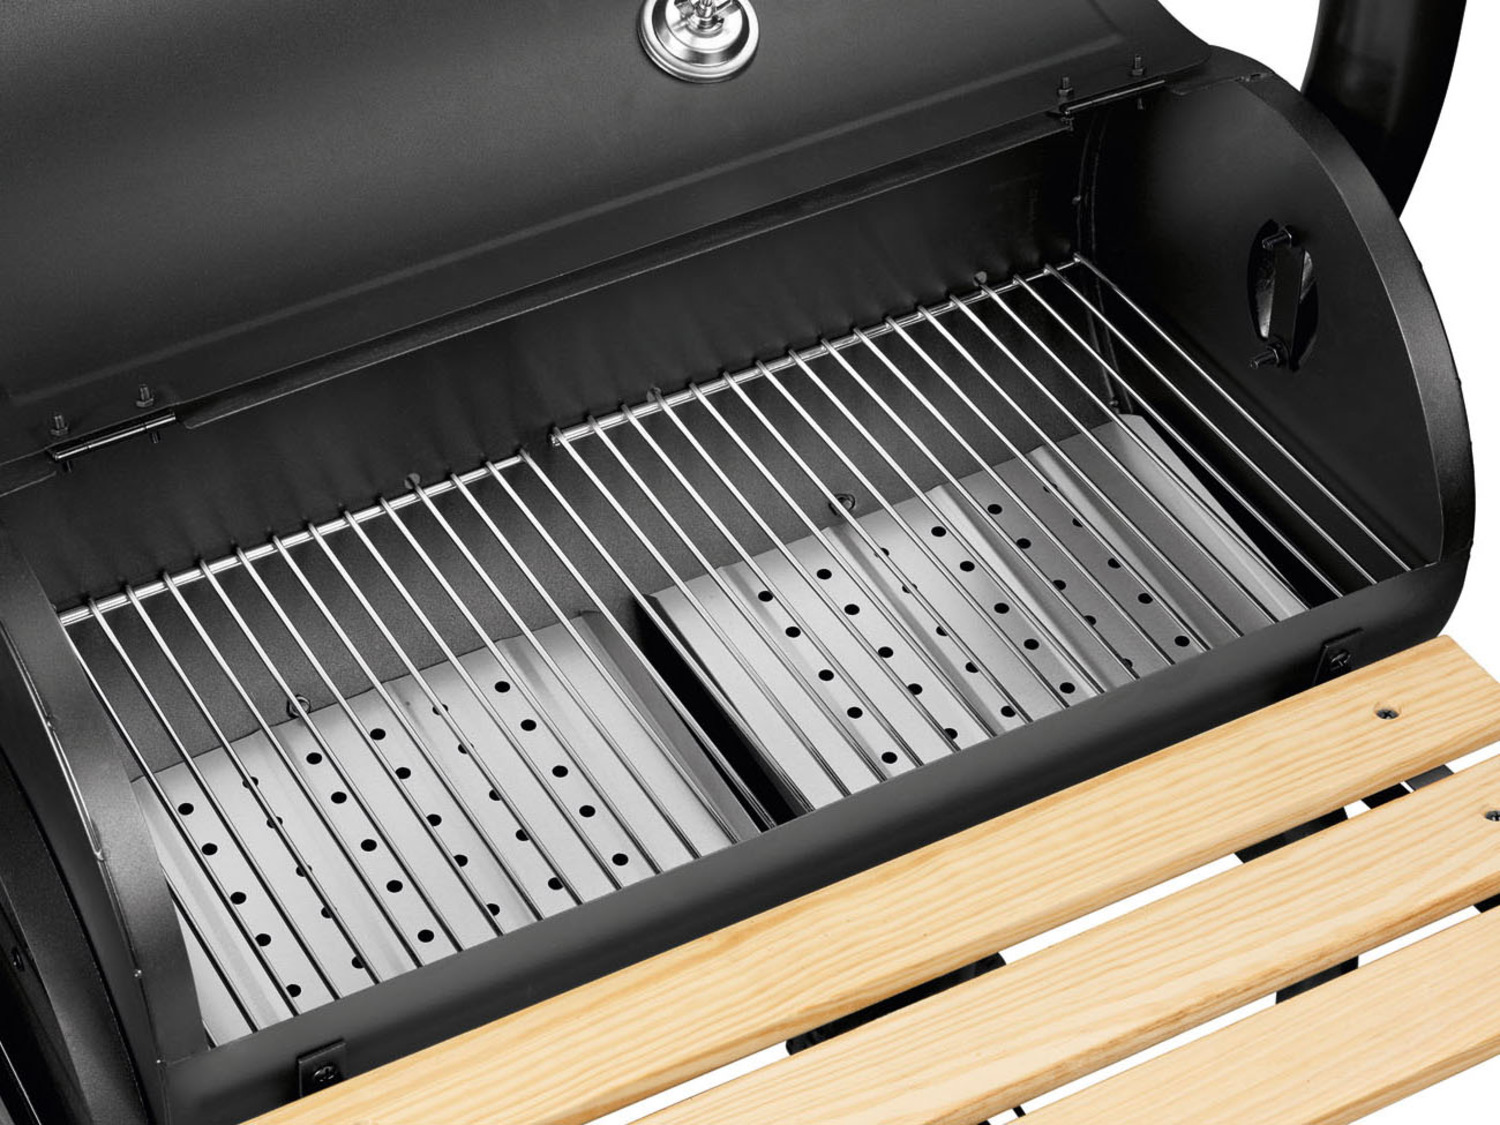 GRILLMEISTER Holzkohle-Smokergrill »GMS 92 A1«, se… mit